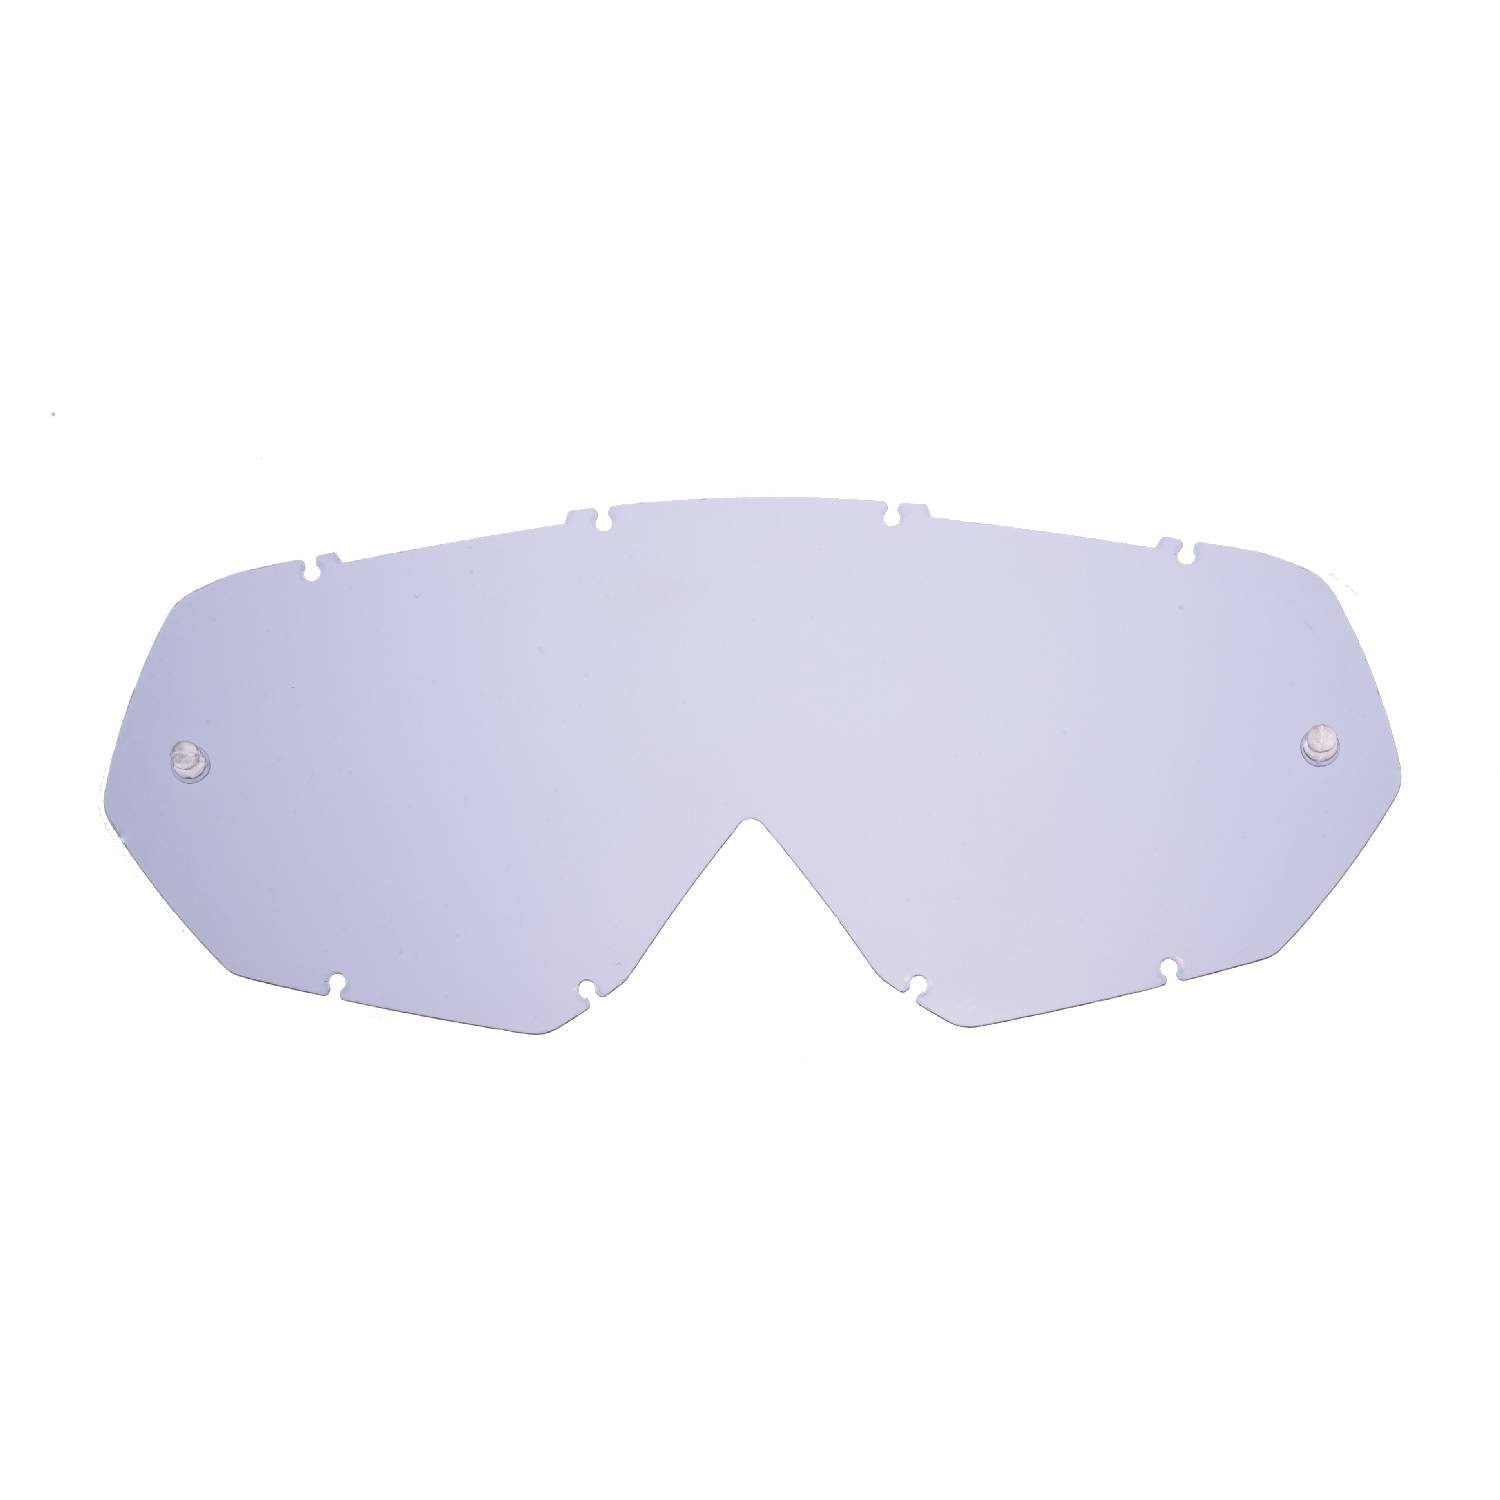 smokey replacement lenses for goggles compatible for Thor Enemy / Hero goggle